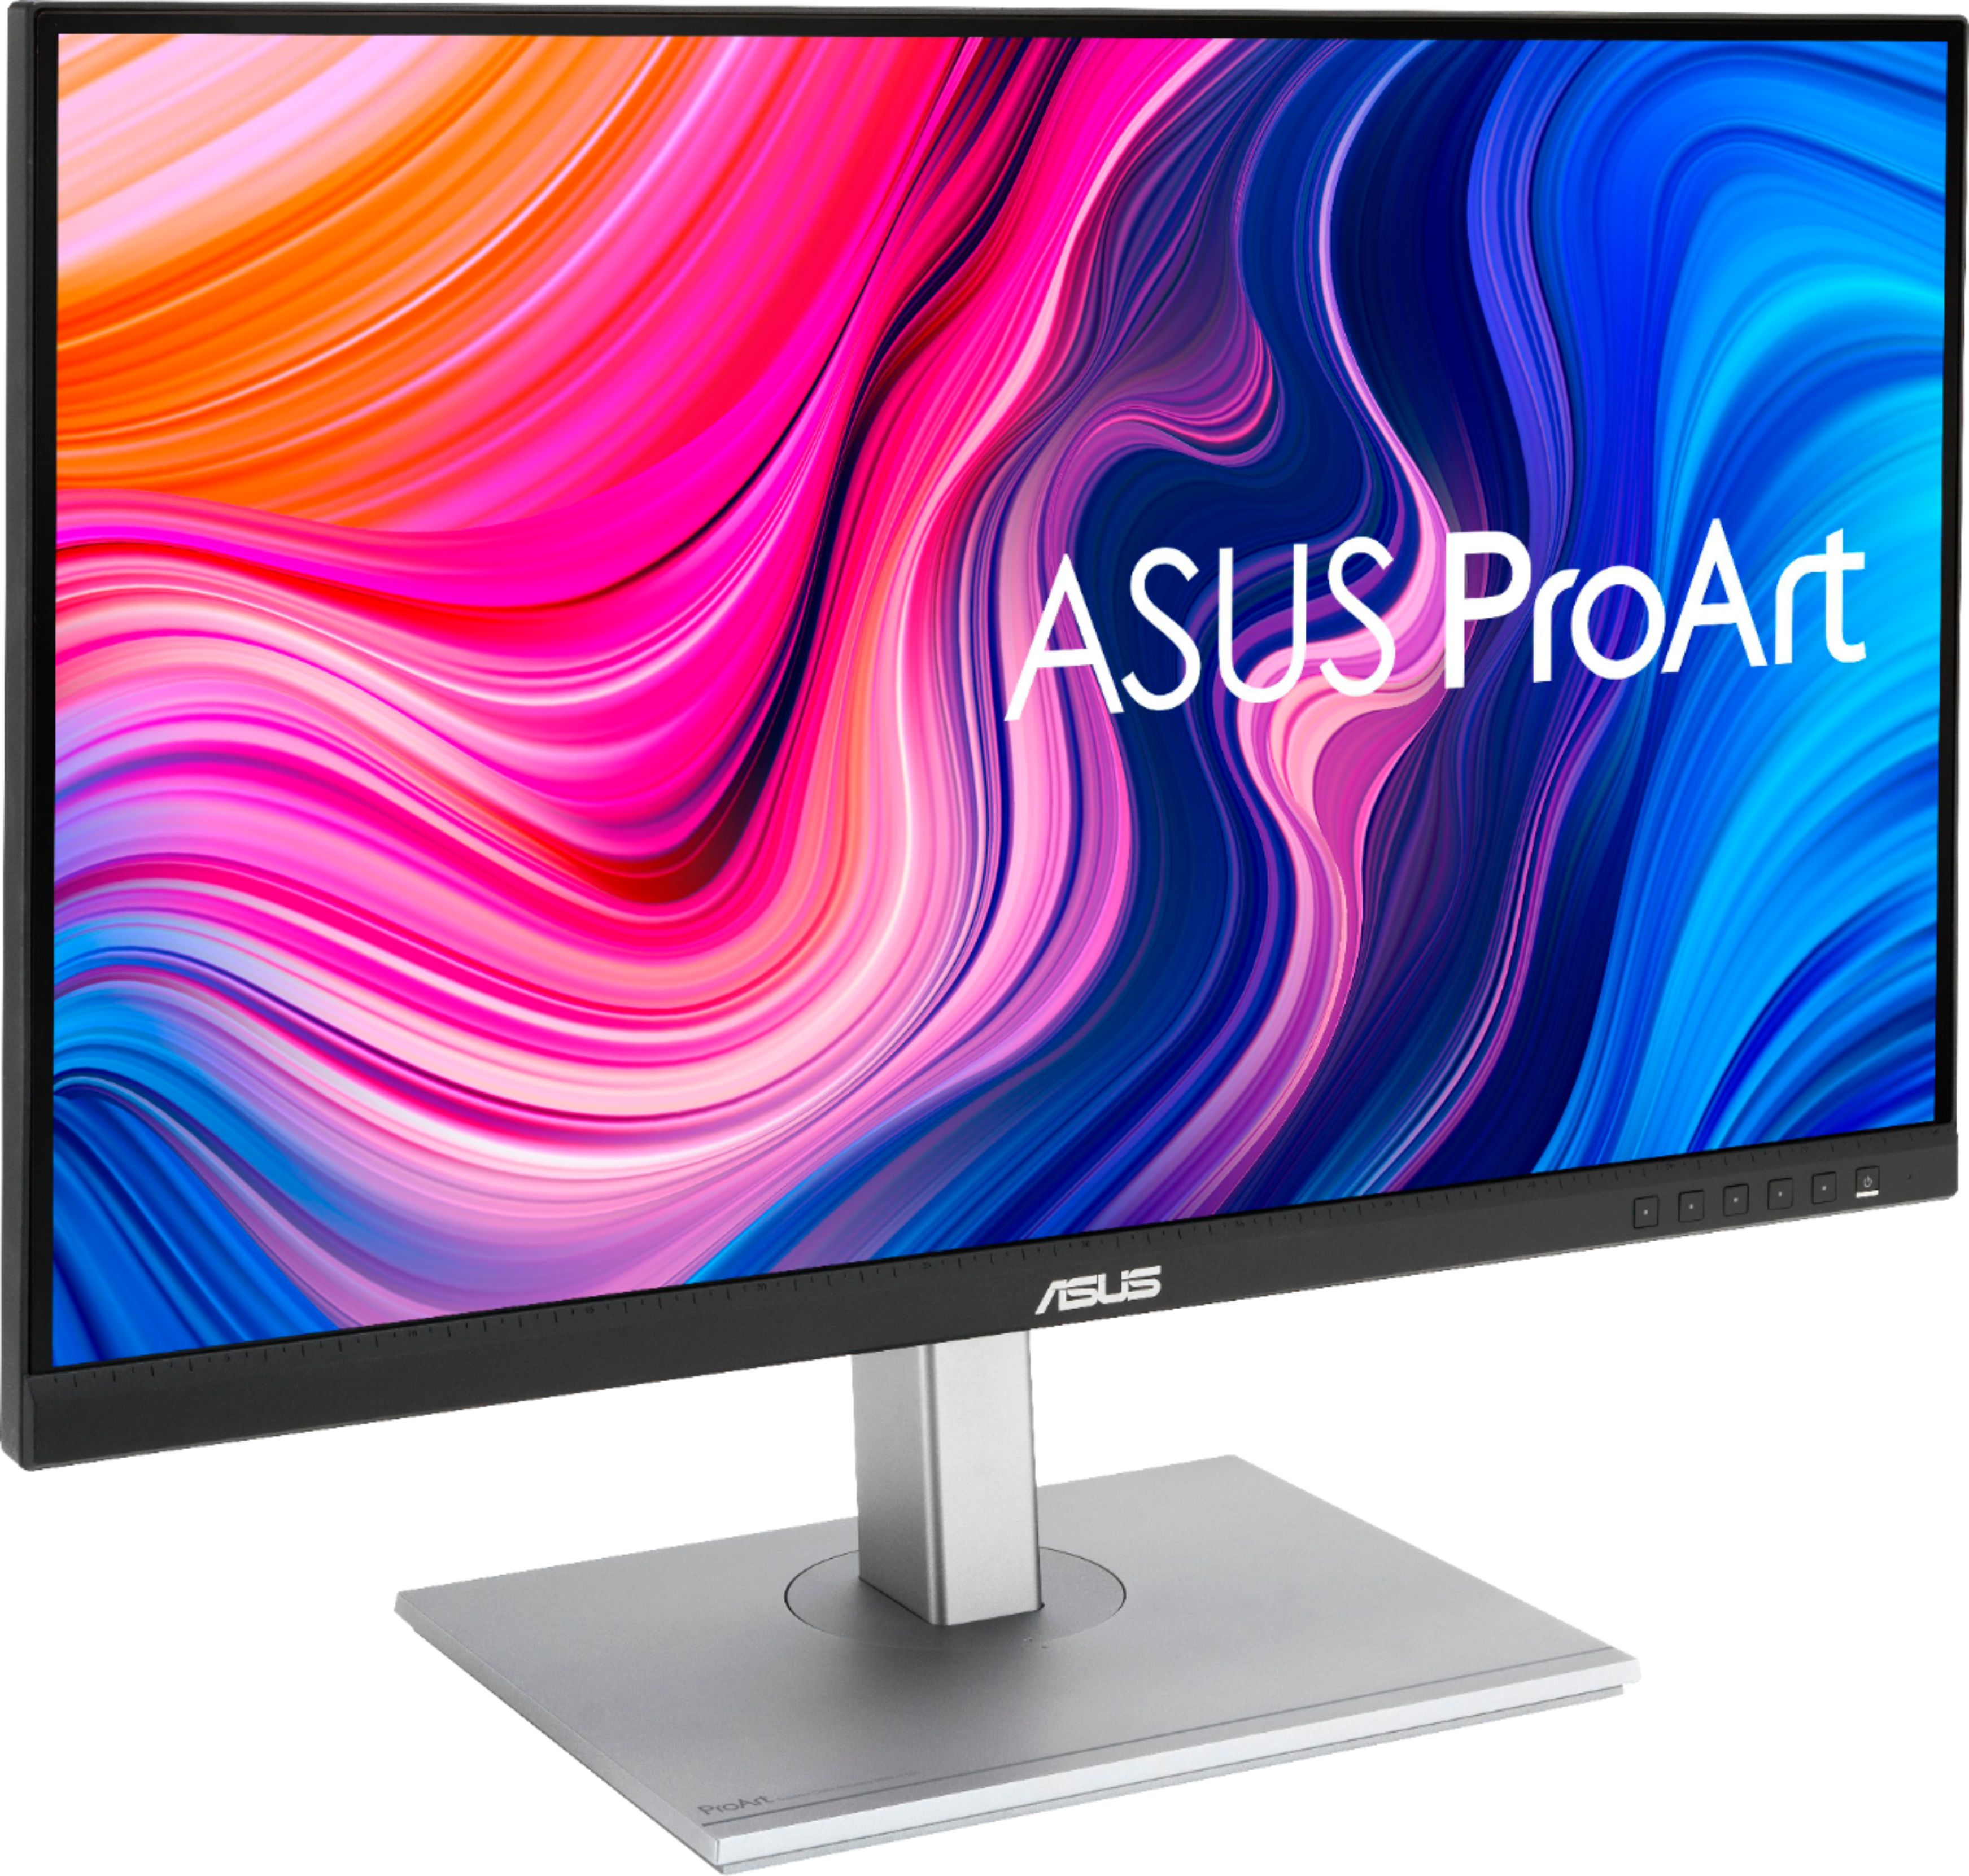 Angle View: ASUS - ProArt 27" IPS 4K Professional USB-C Monitor with Height Adjustable (DisplayPort,HDMI)